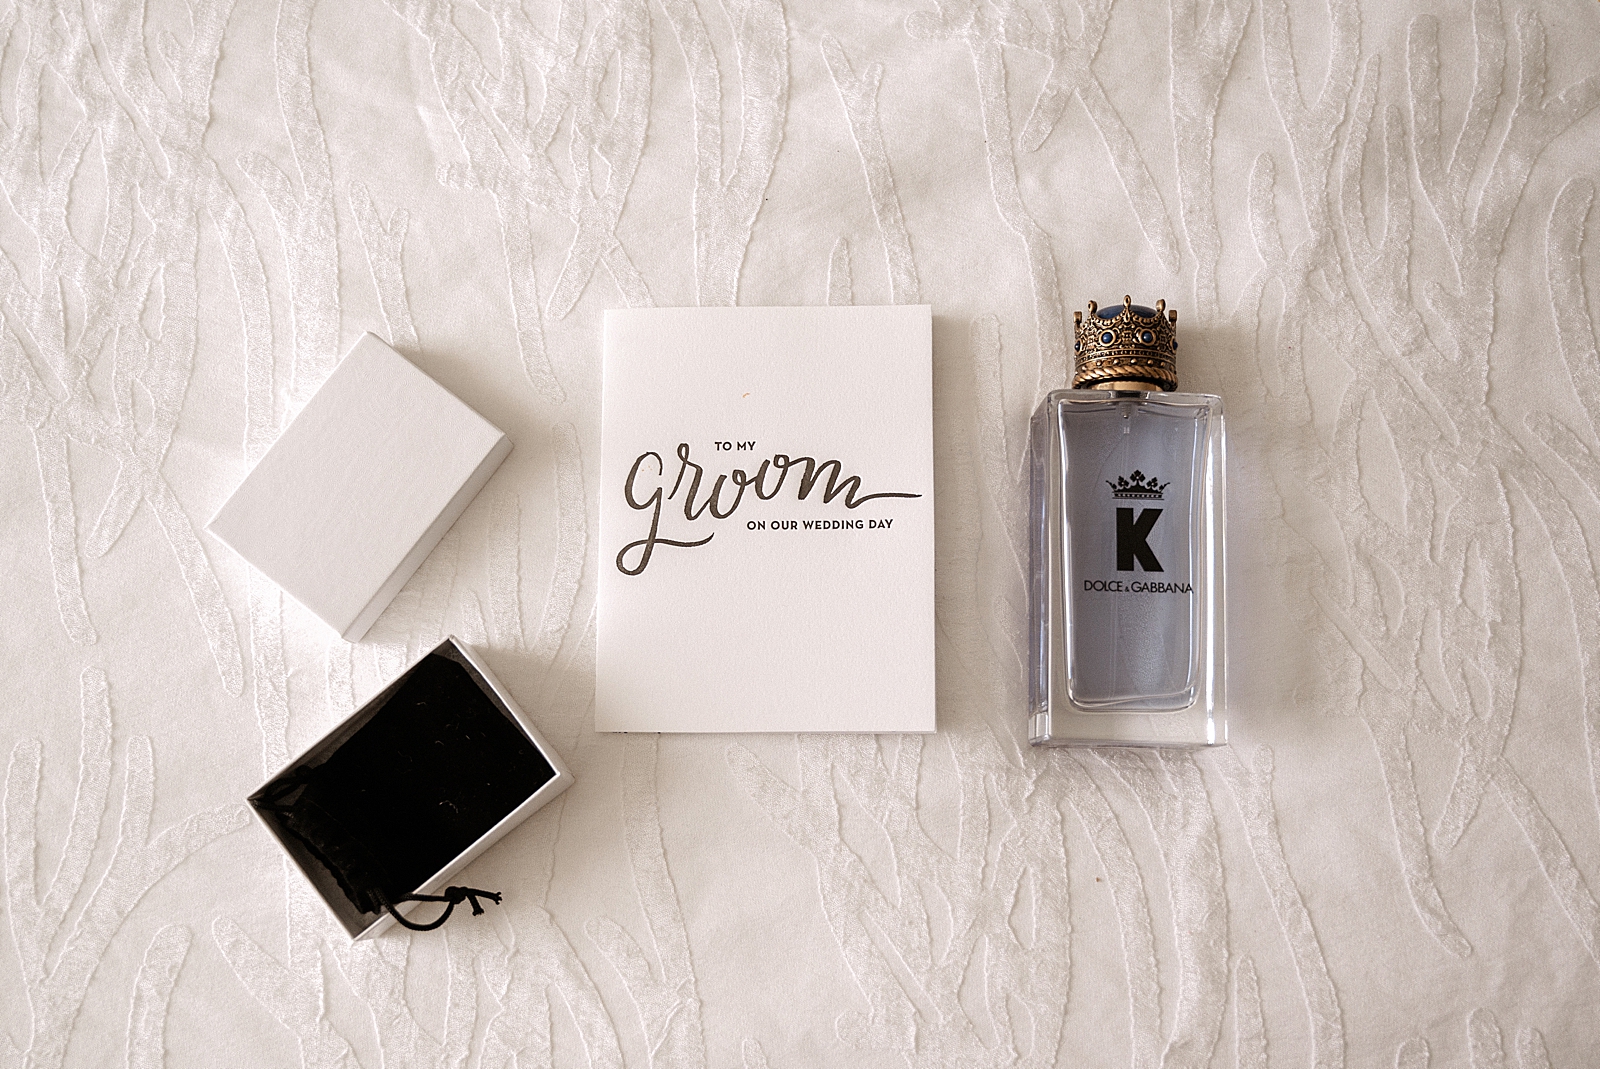 Detail shot of Groom's letter and cologne